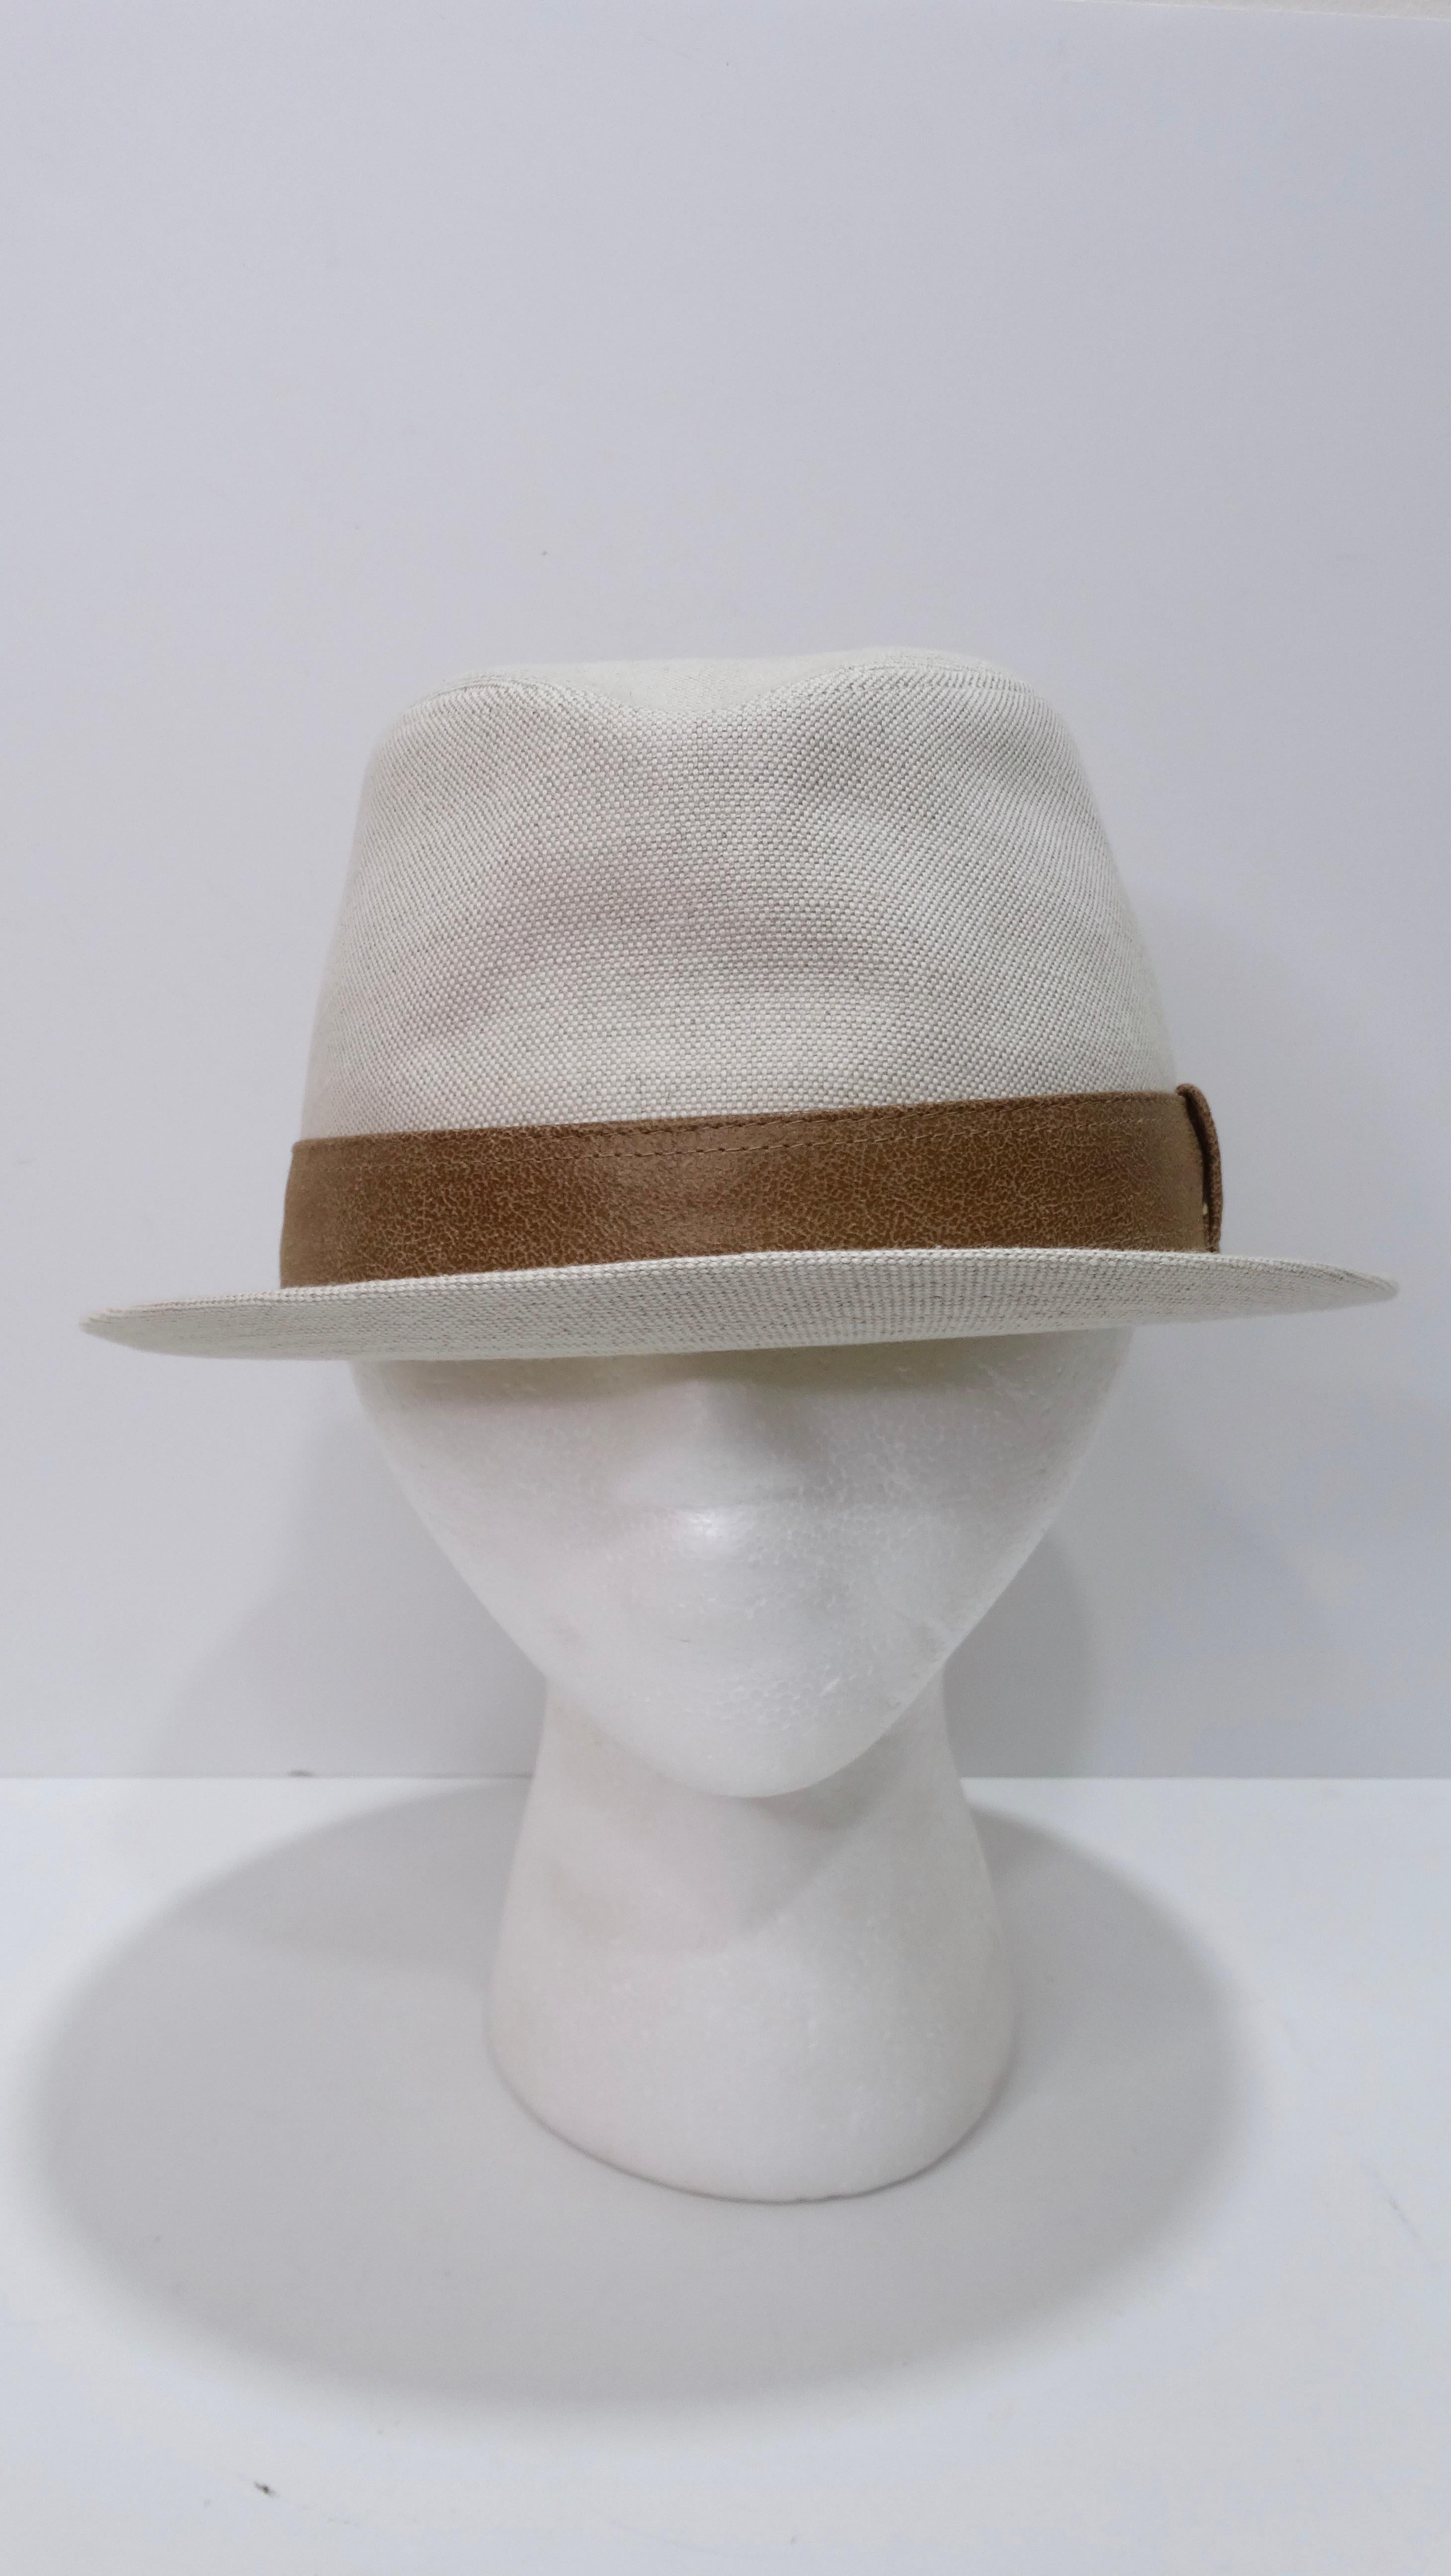 This off-white Hermes hat with a classic brown strap is a simplistic and stylish look that shows elegance and class. Bringing out both feminine and masculine undertones this hat can be worn by any gender. The hat is creased down the center toward